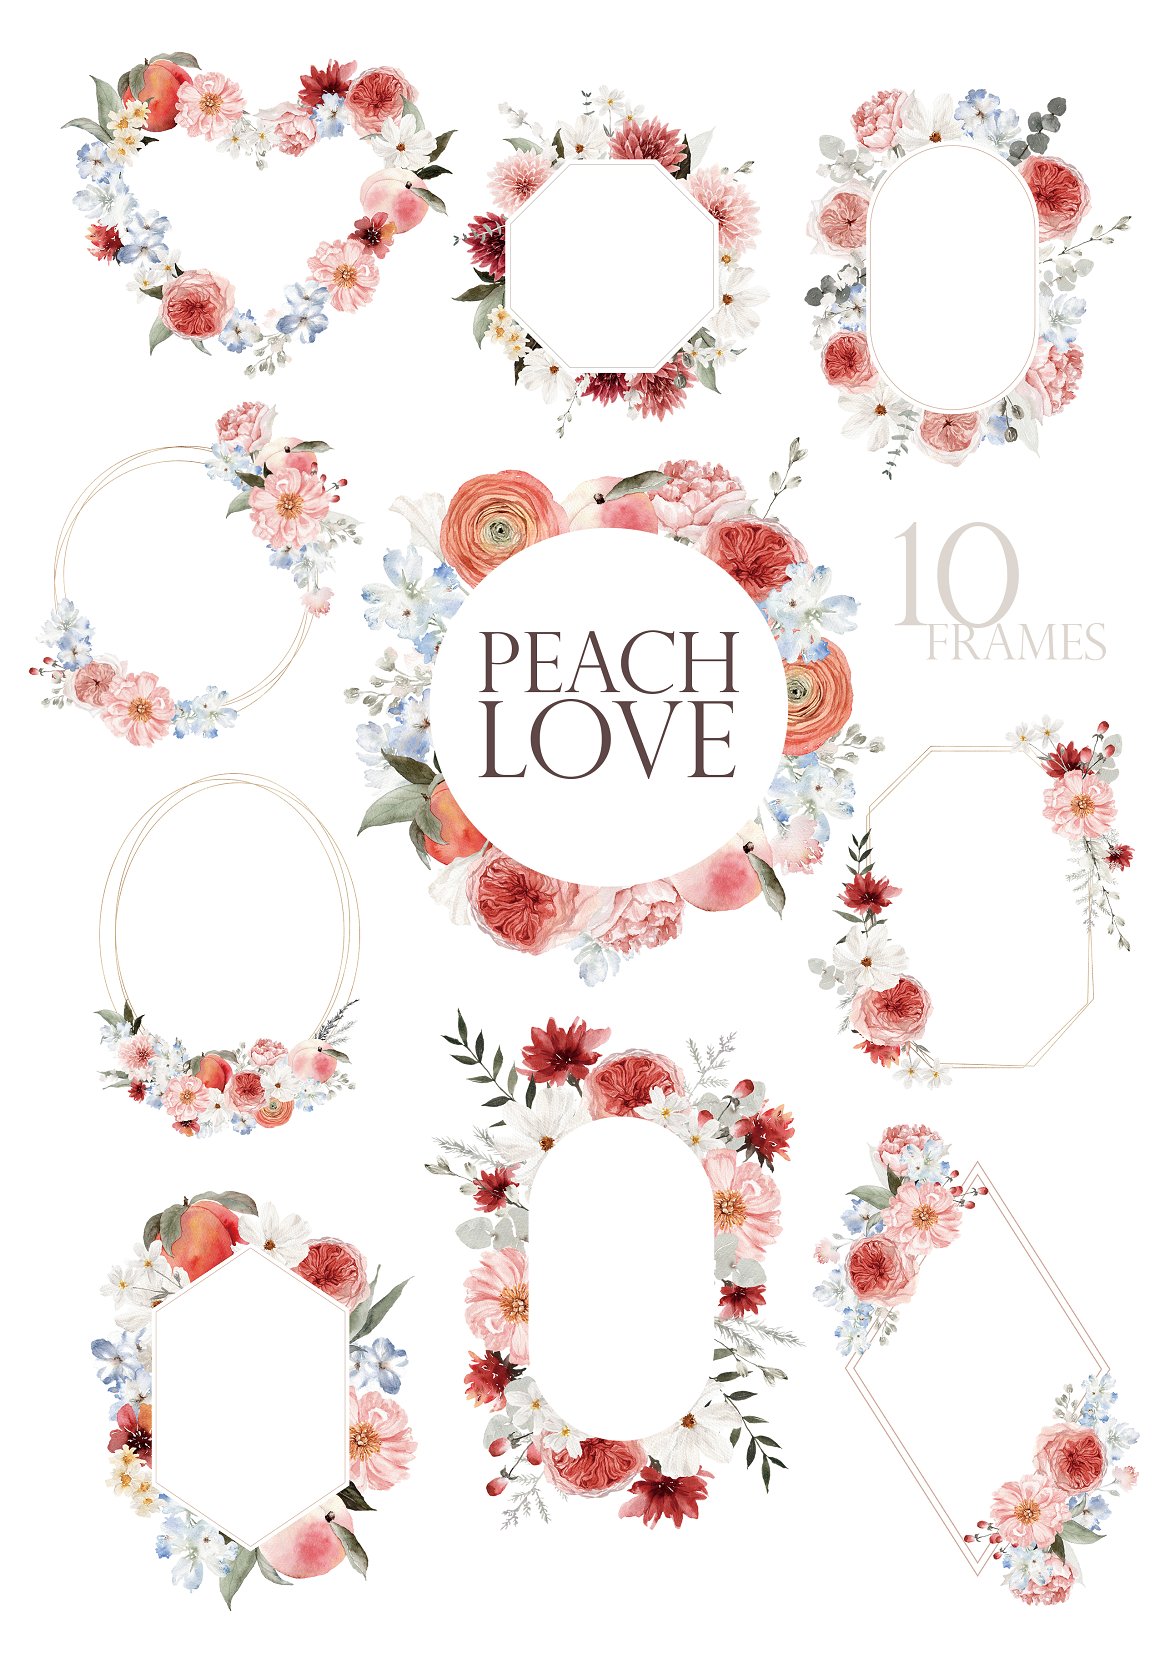 A set of 10 different flower and peach frames on a white background.